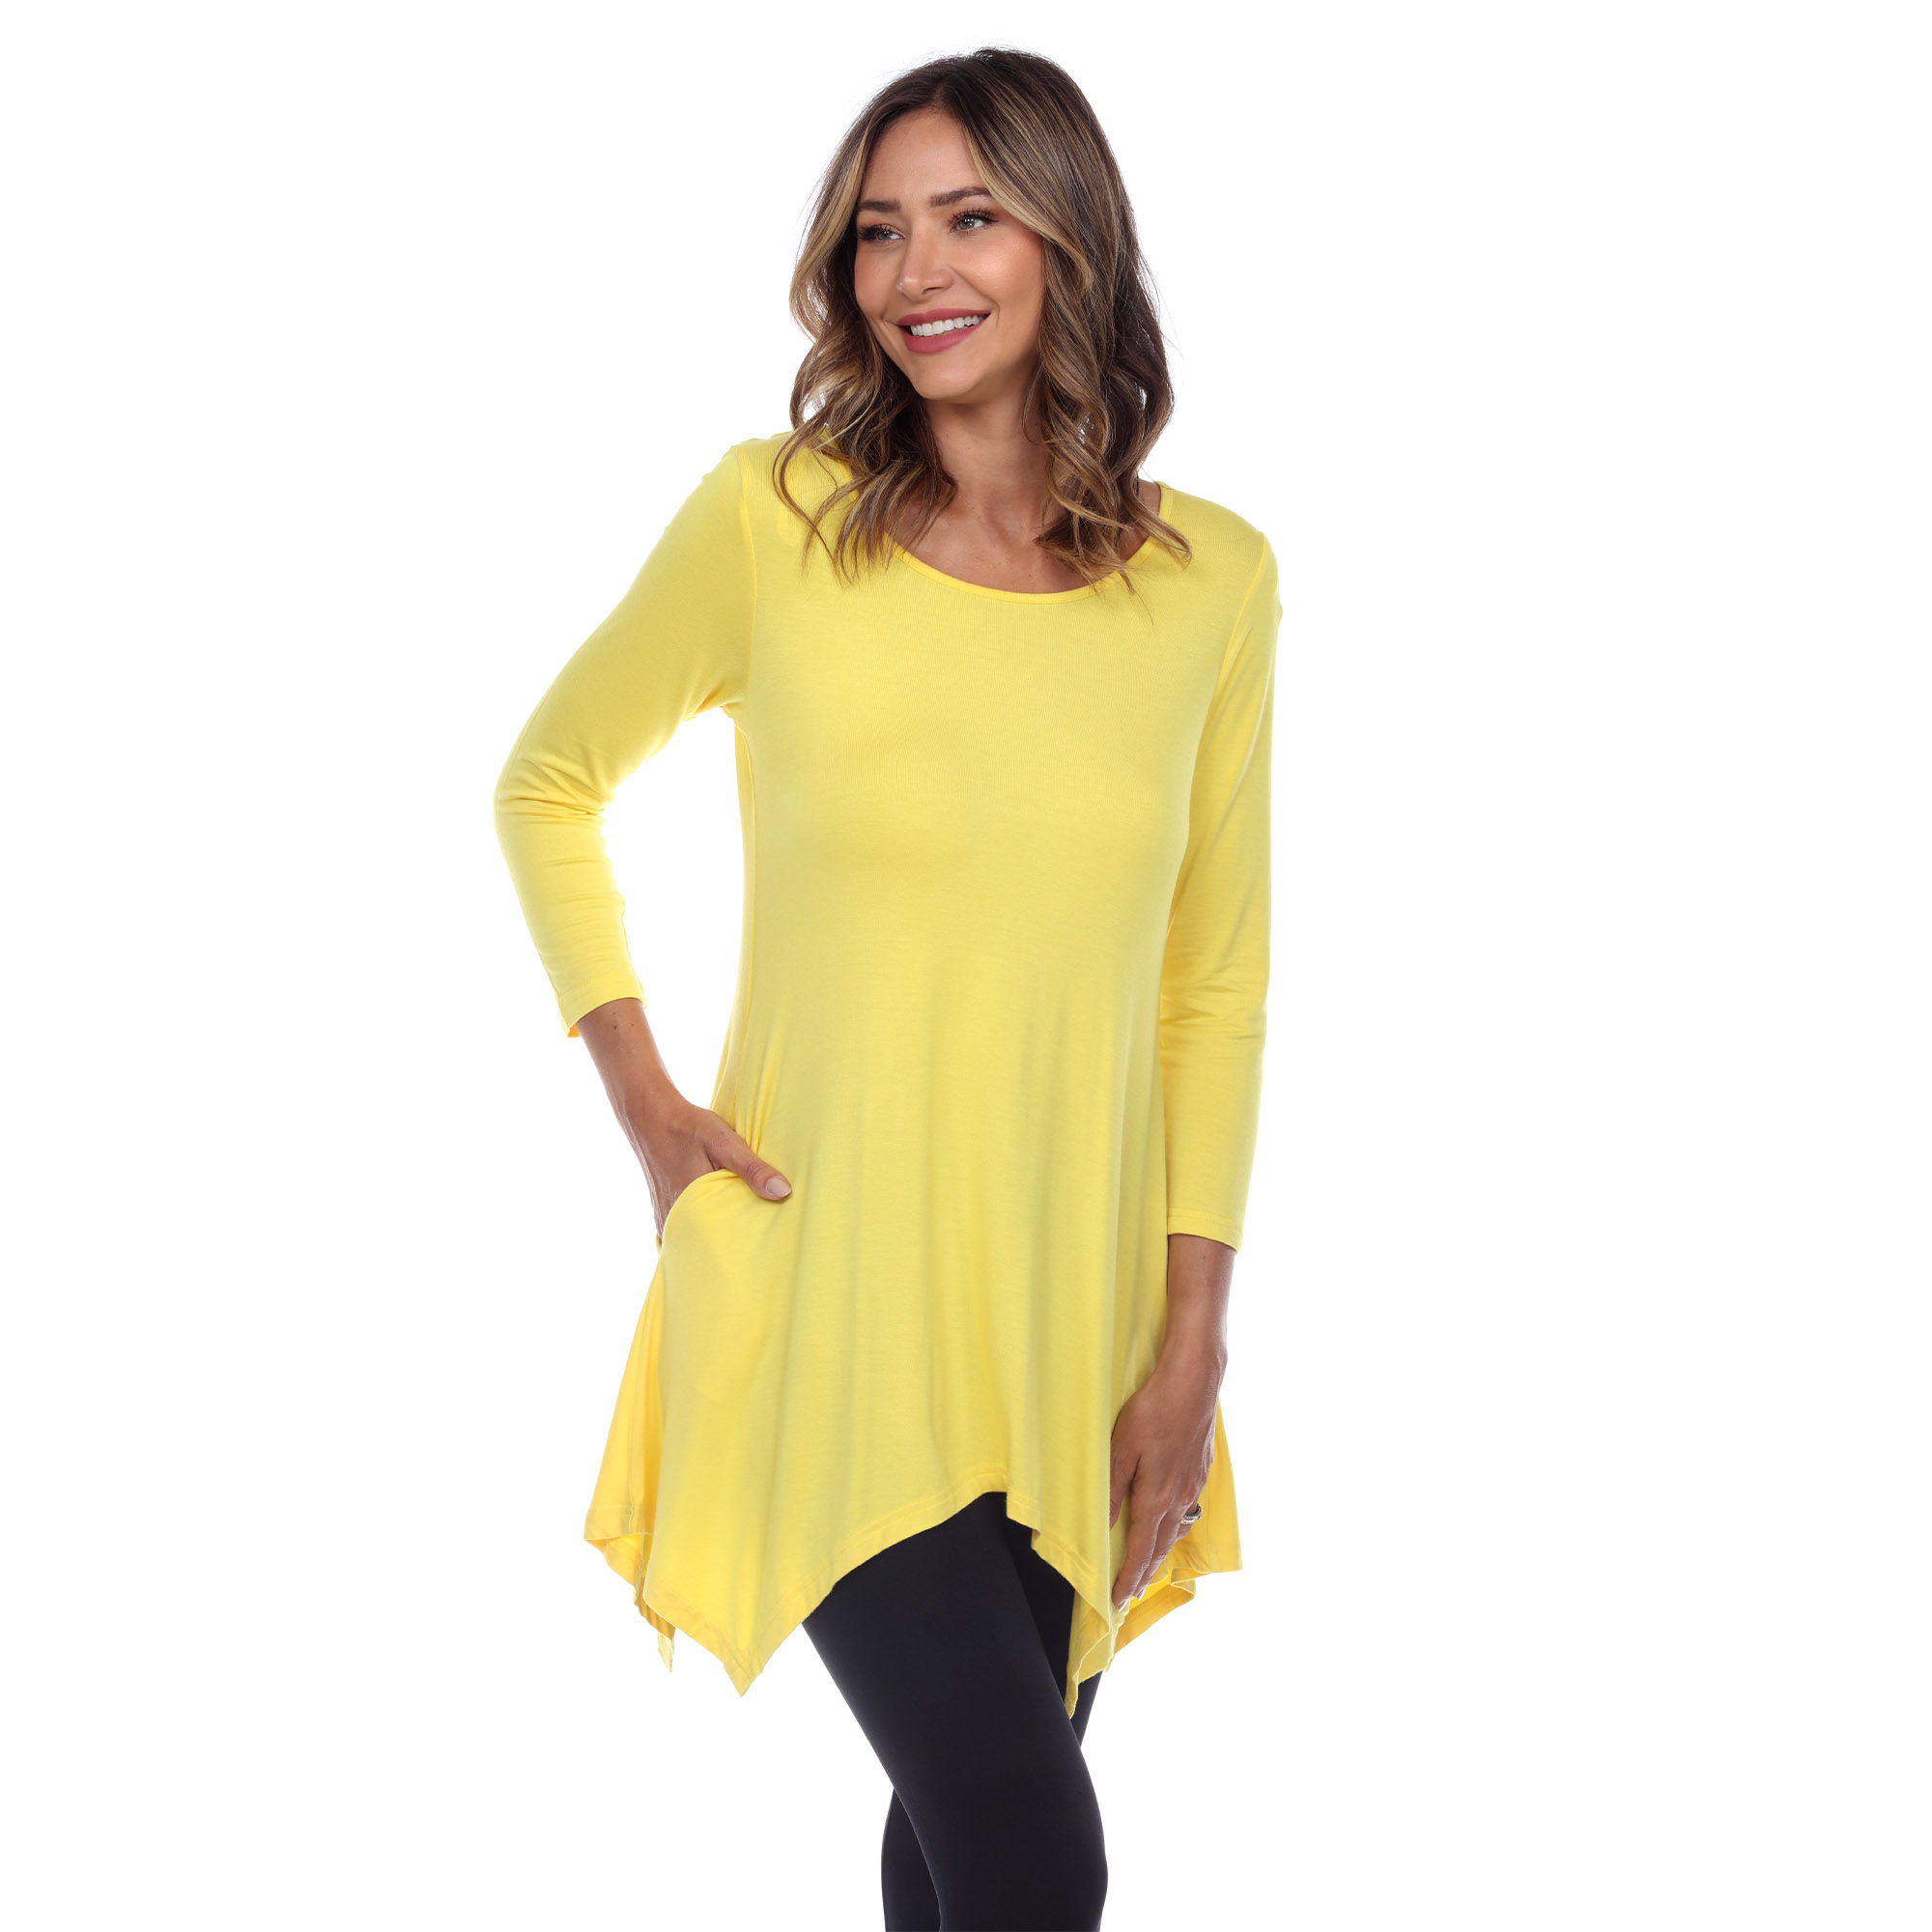 White Mark Women's Quarter Sleeve Tunic Top With Pockets - Yellow, Large